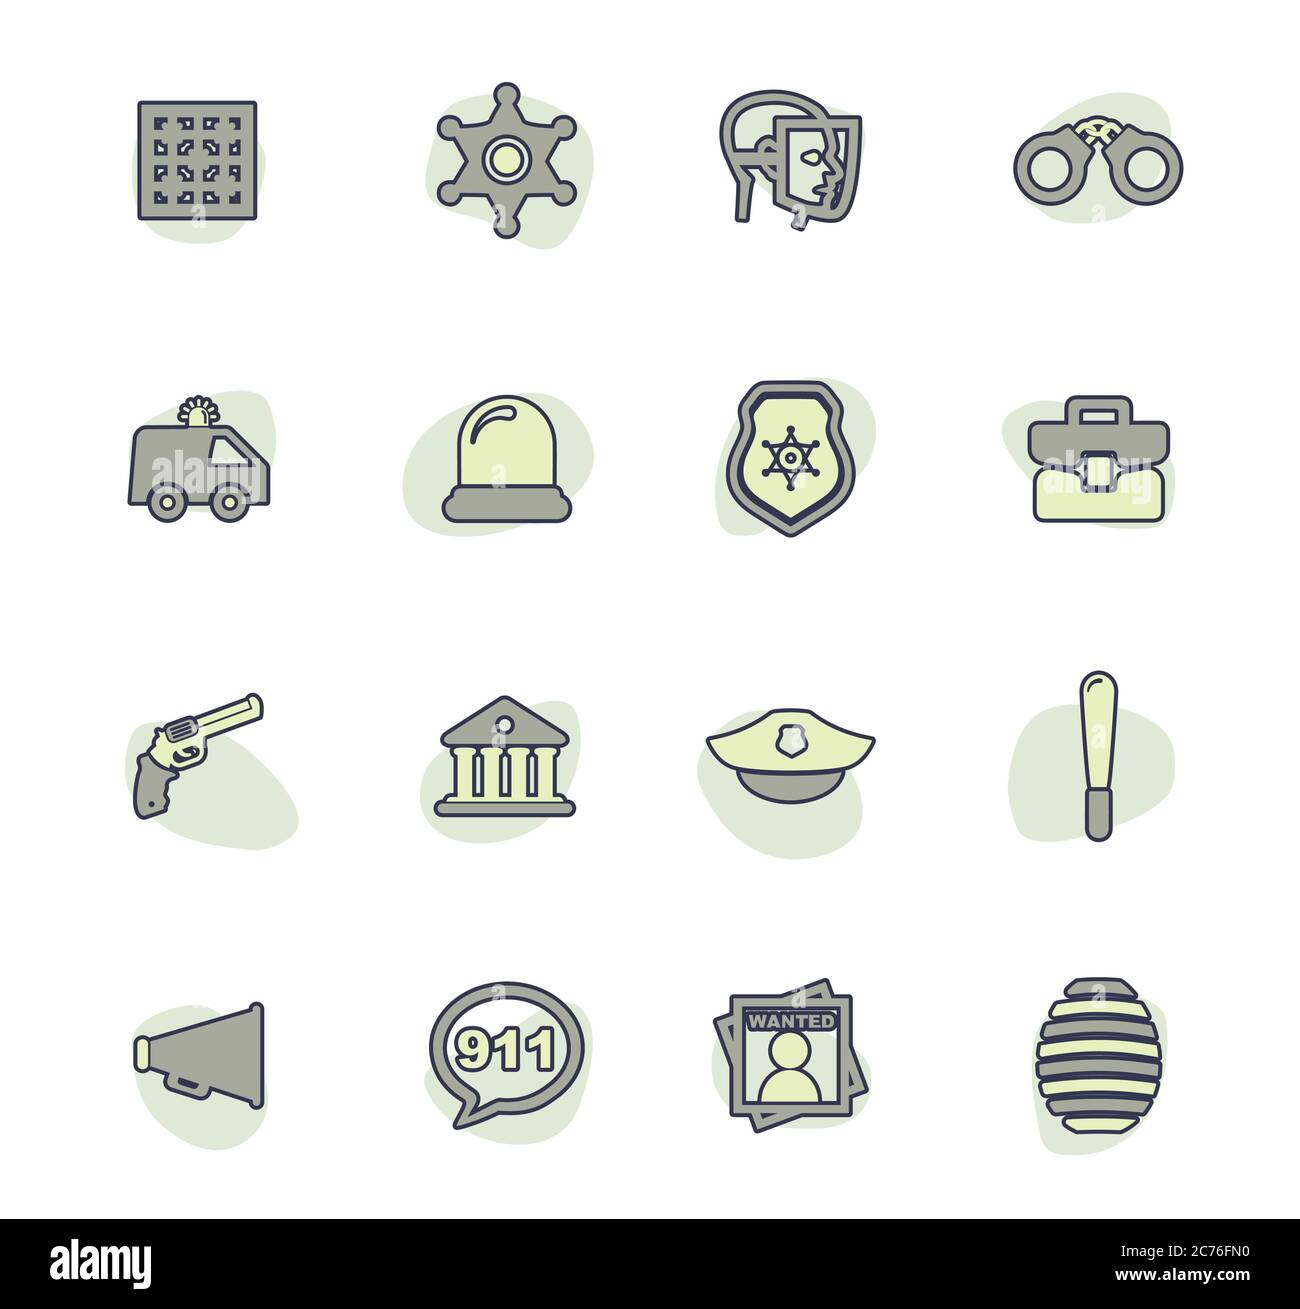 Police icons set Stock Vector